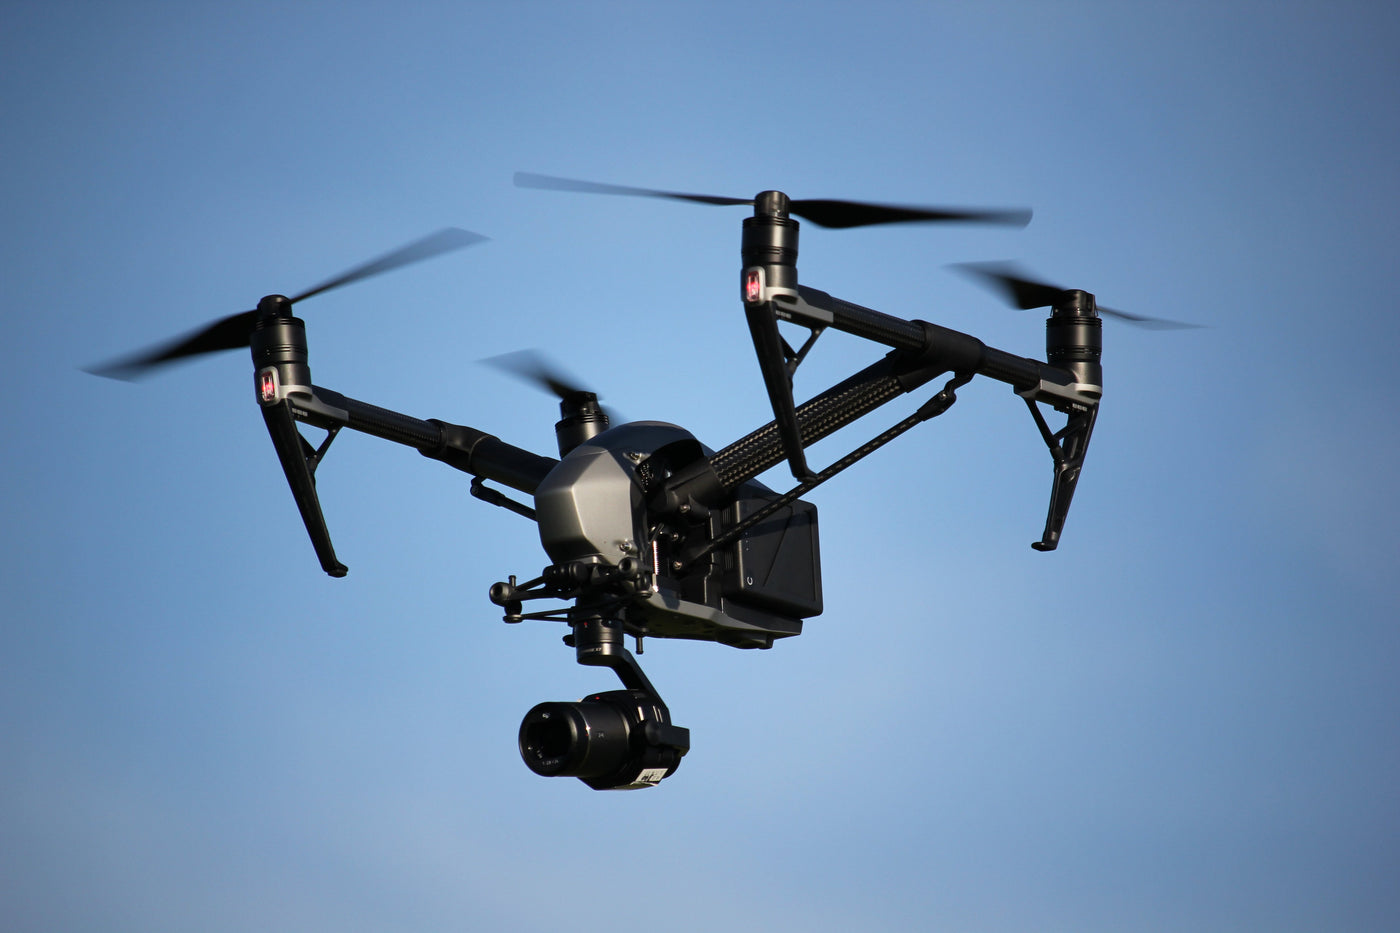 Film Company Using DJI Drones Supplied By Heliguy For Netflix and the BBC